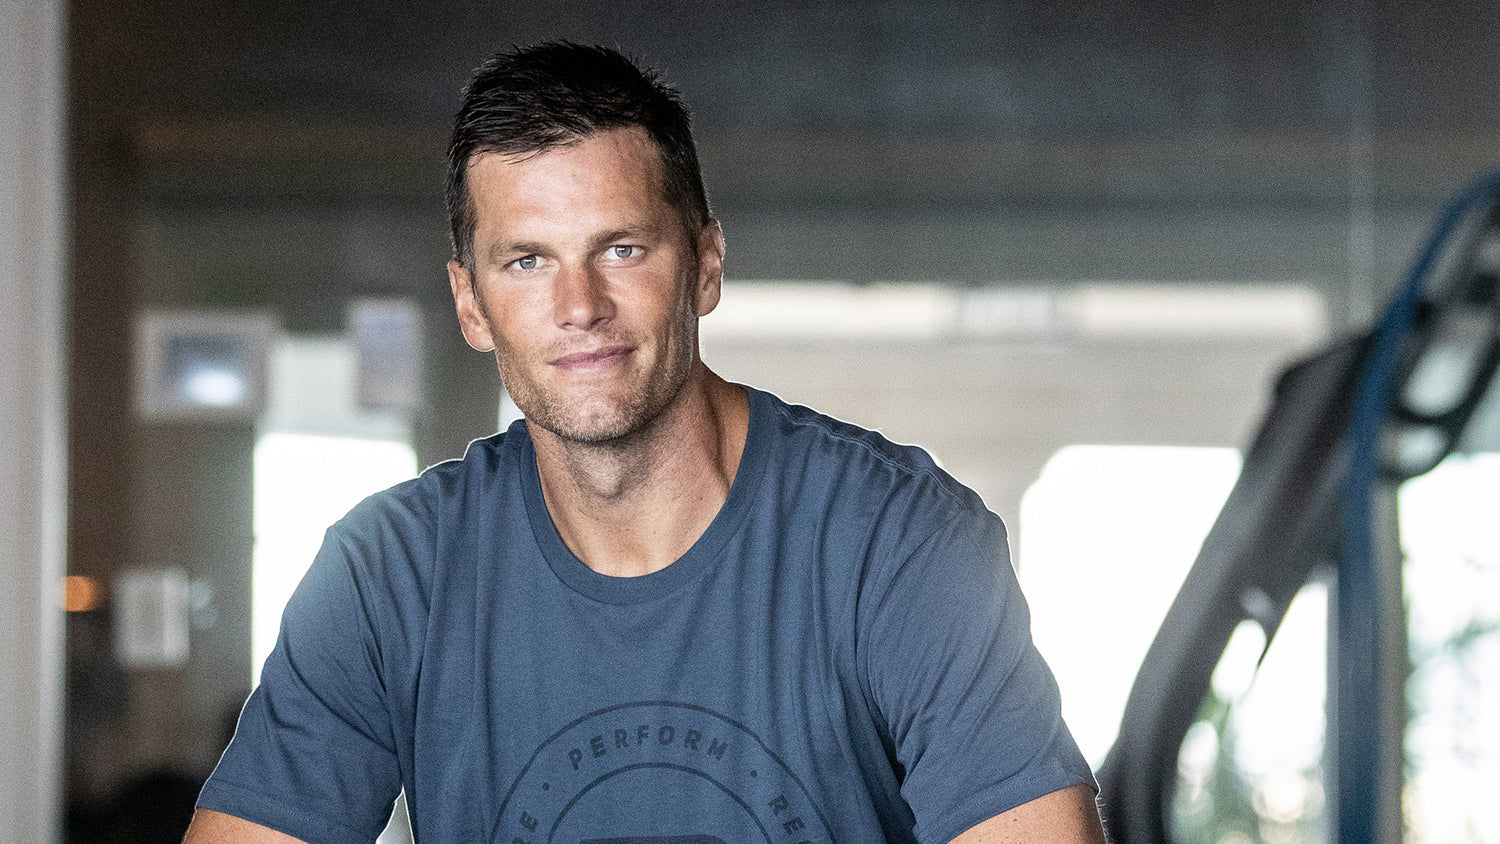 So, What Does Tom Brady Eat? Introducing the TB12 Diet